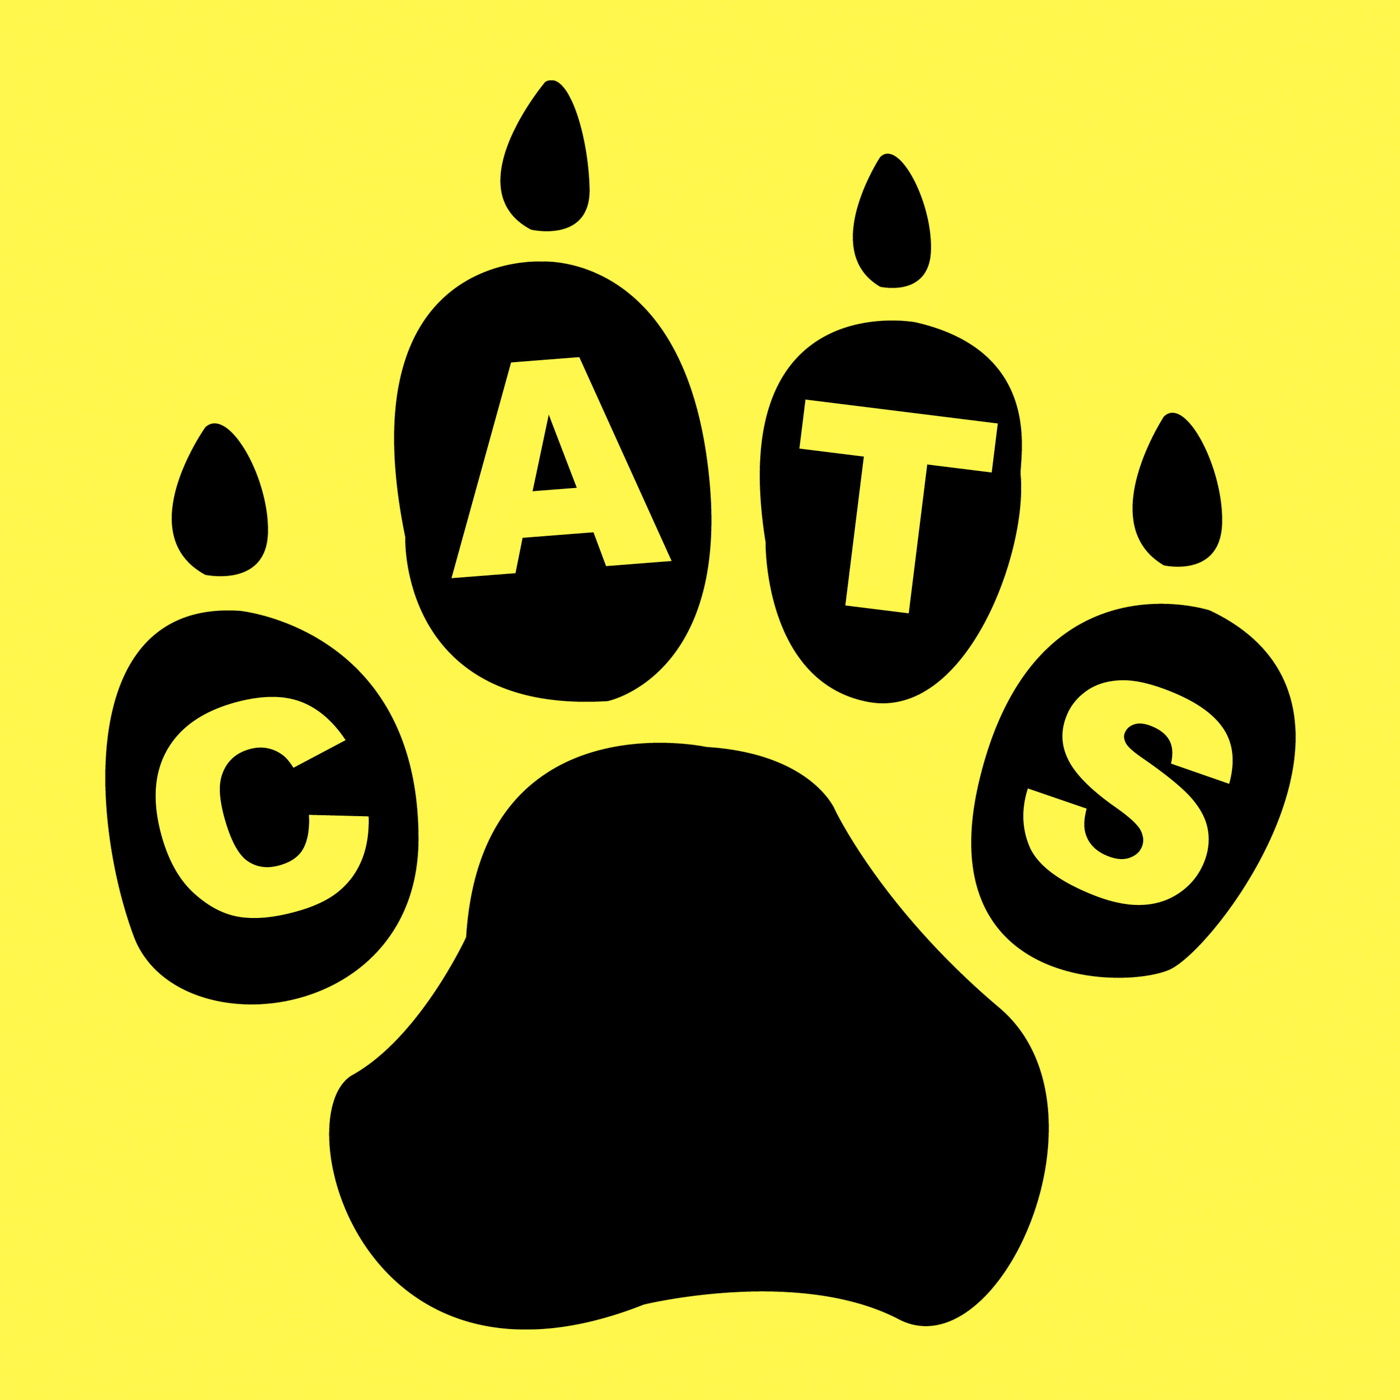 Cats paw represents pet care and feline photo